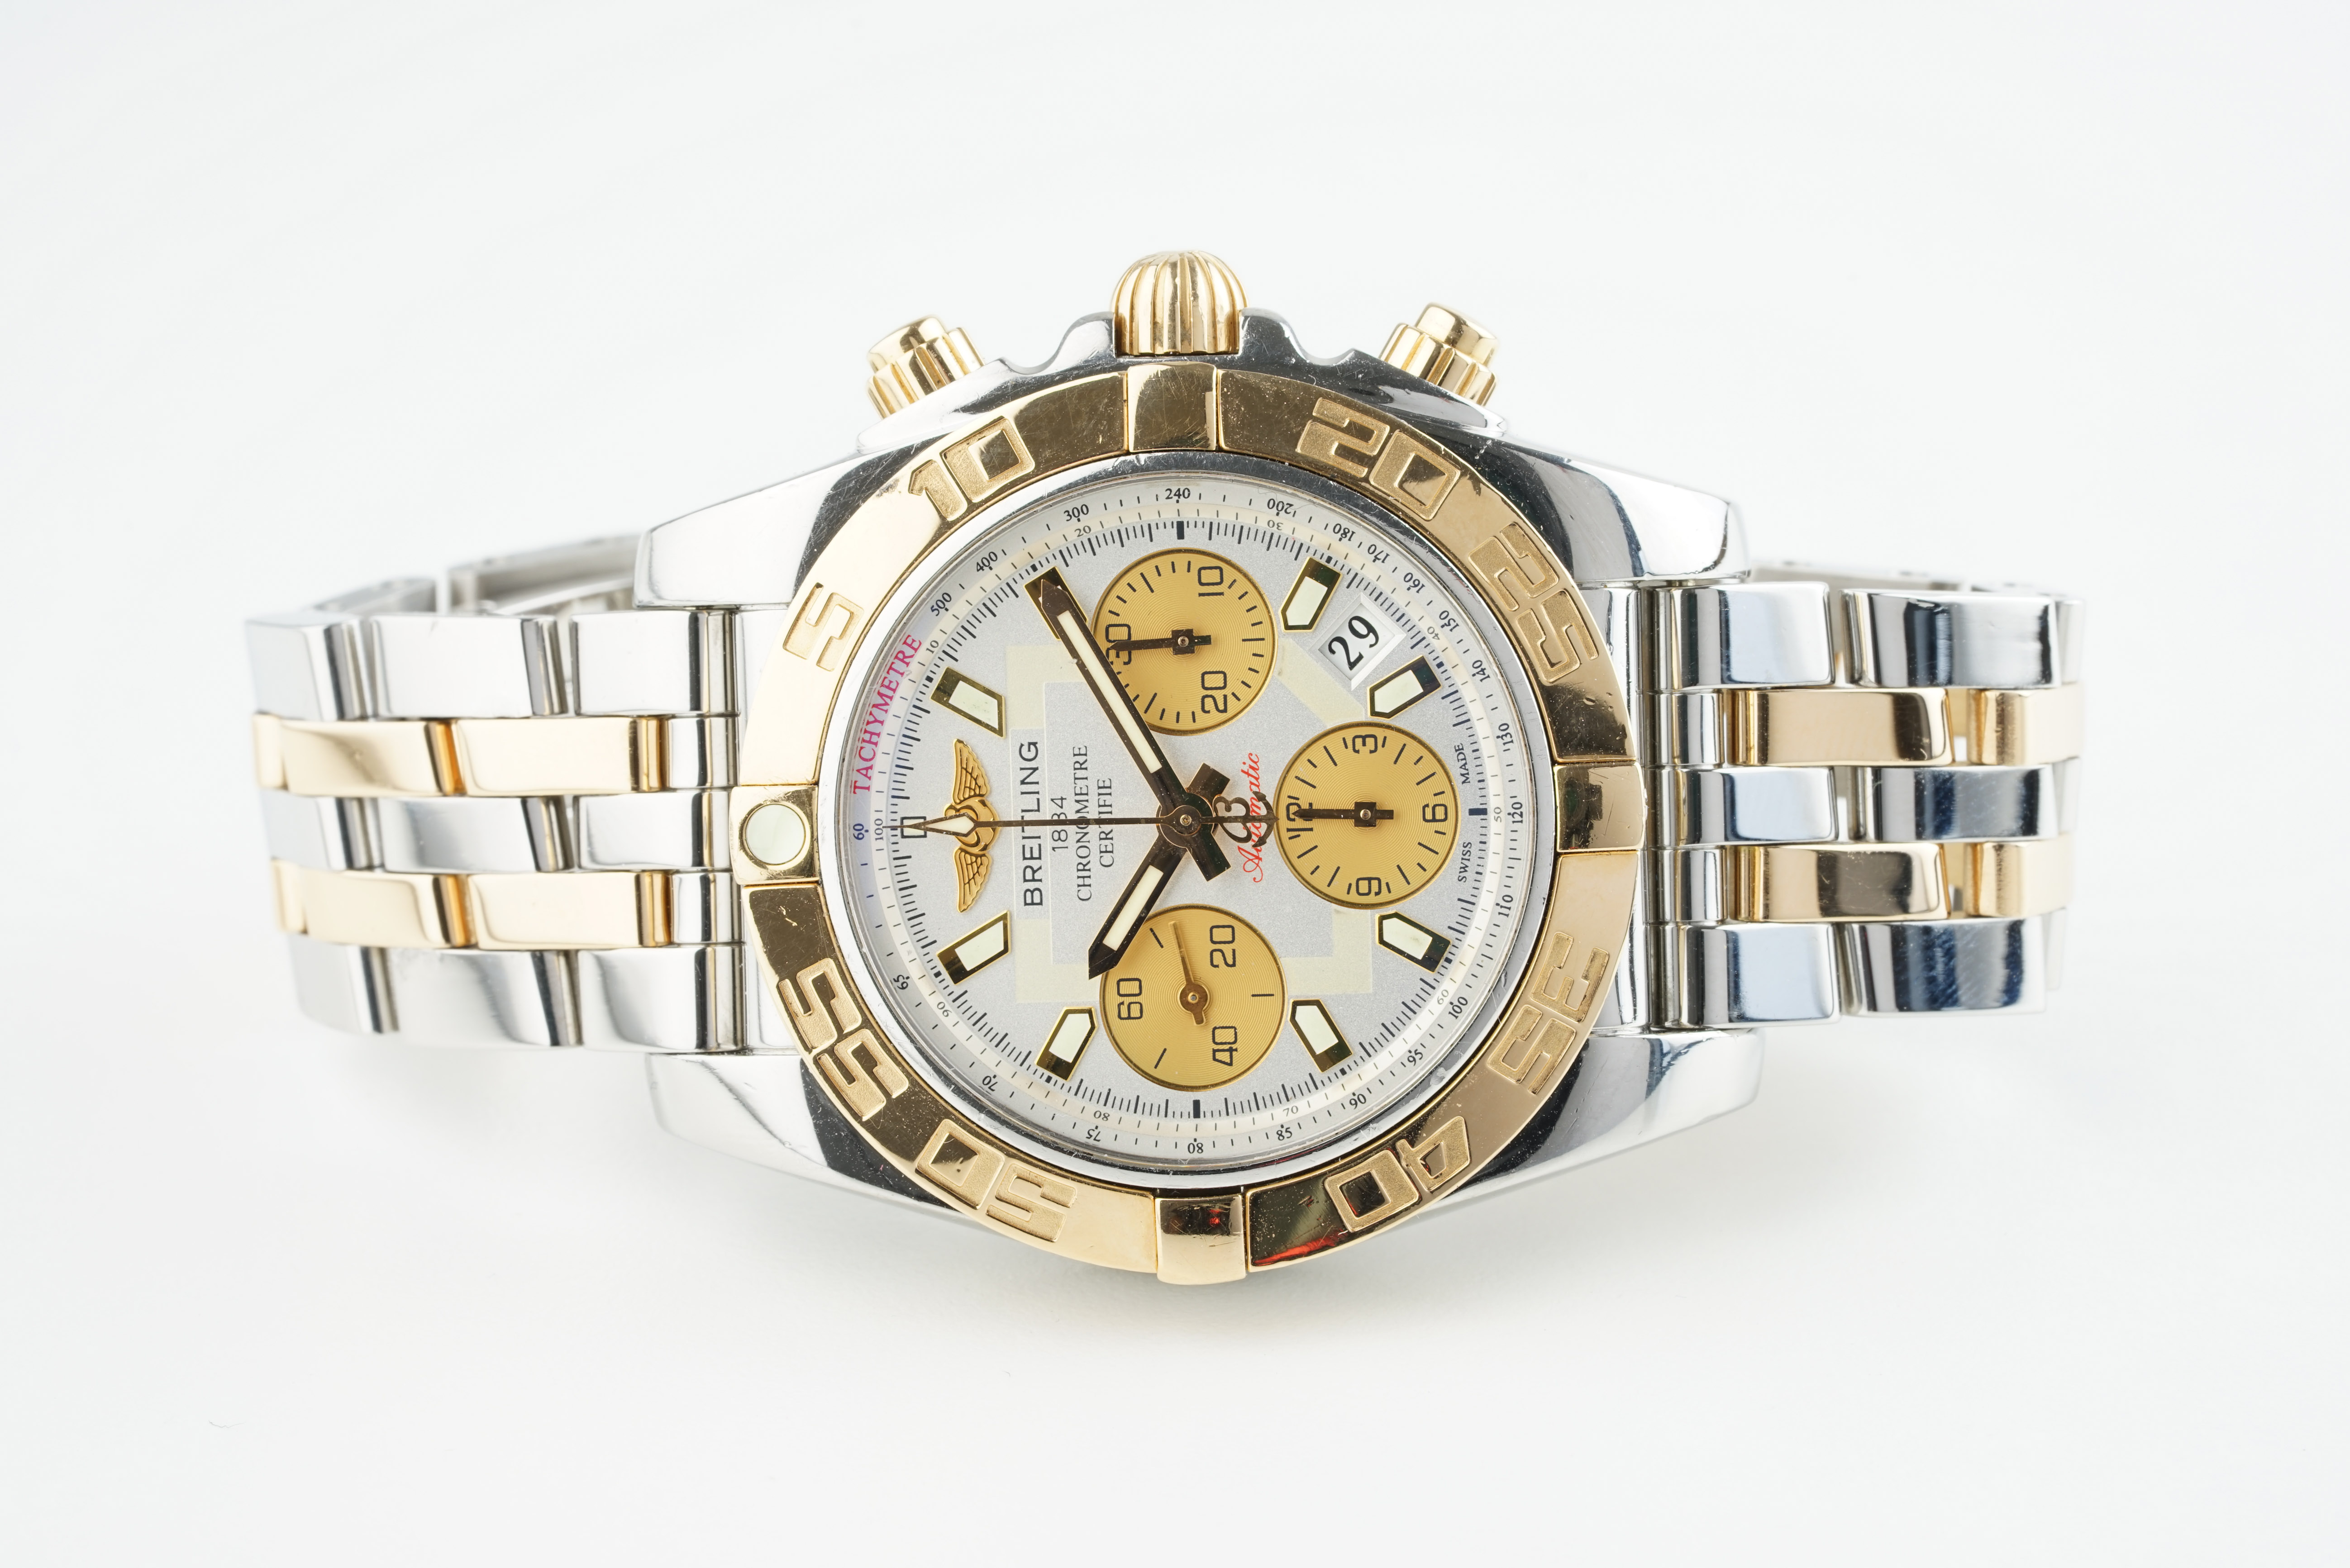 GENTLEMENS BREITLING CHRONOMETER CHRONOGRAPH WRISTWATCH REF. CB0140, circular two tone dial with